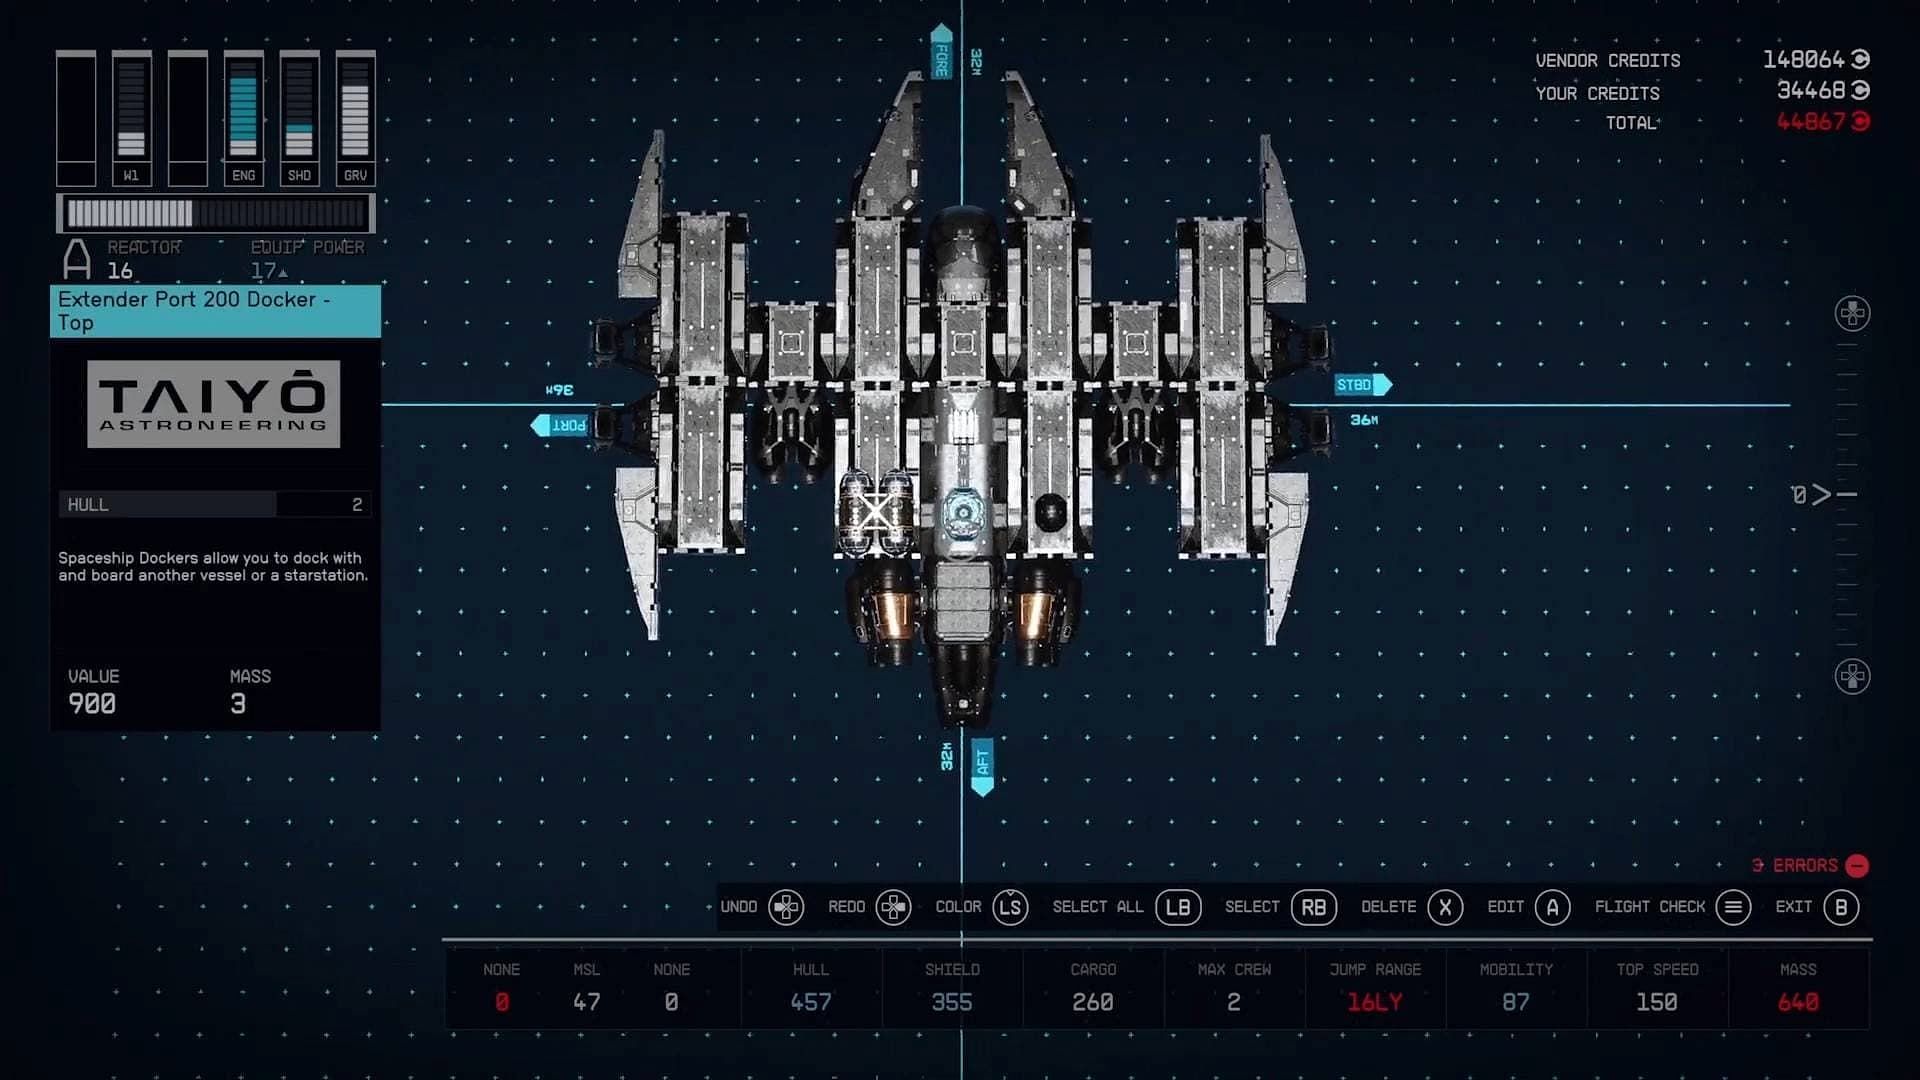 Starfield Batwing Spaceship guide: Parts, colors, and more